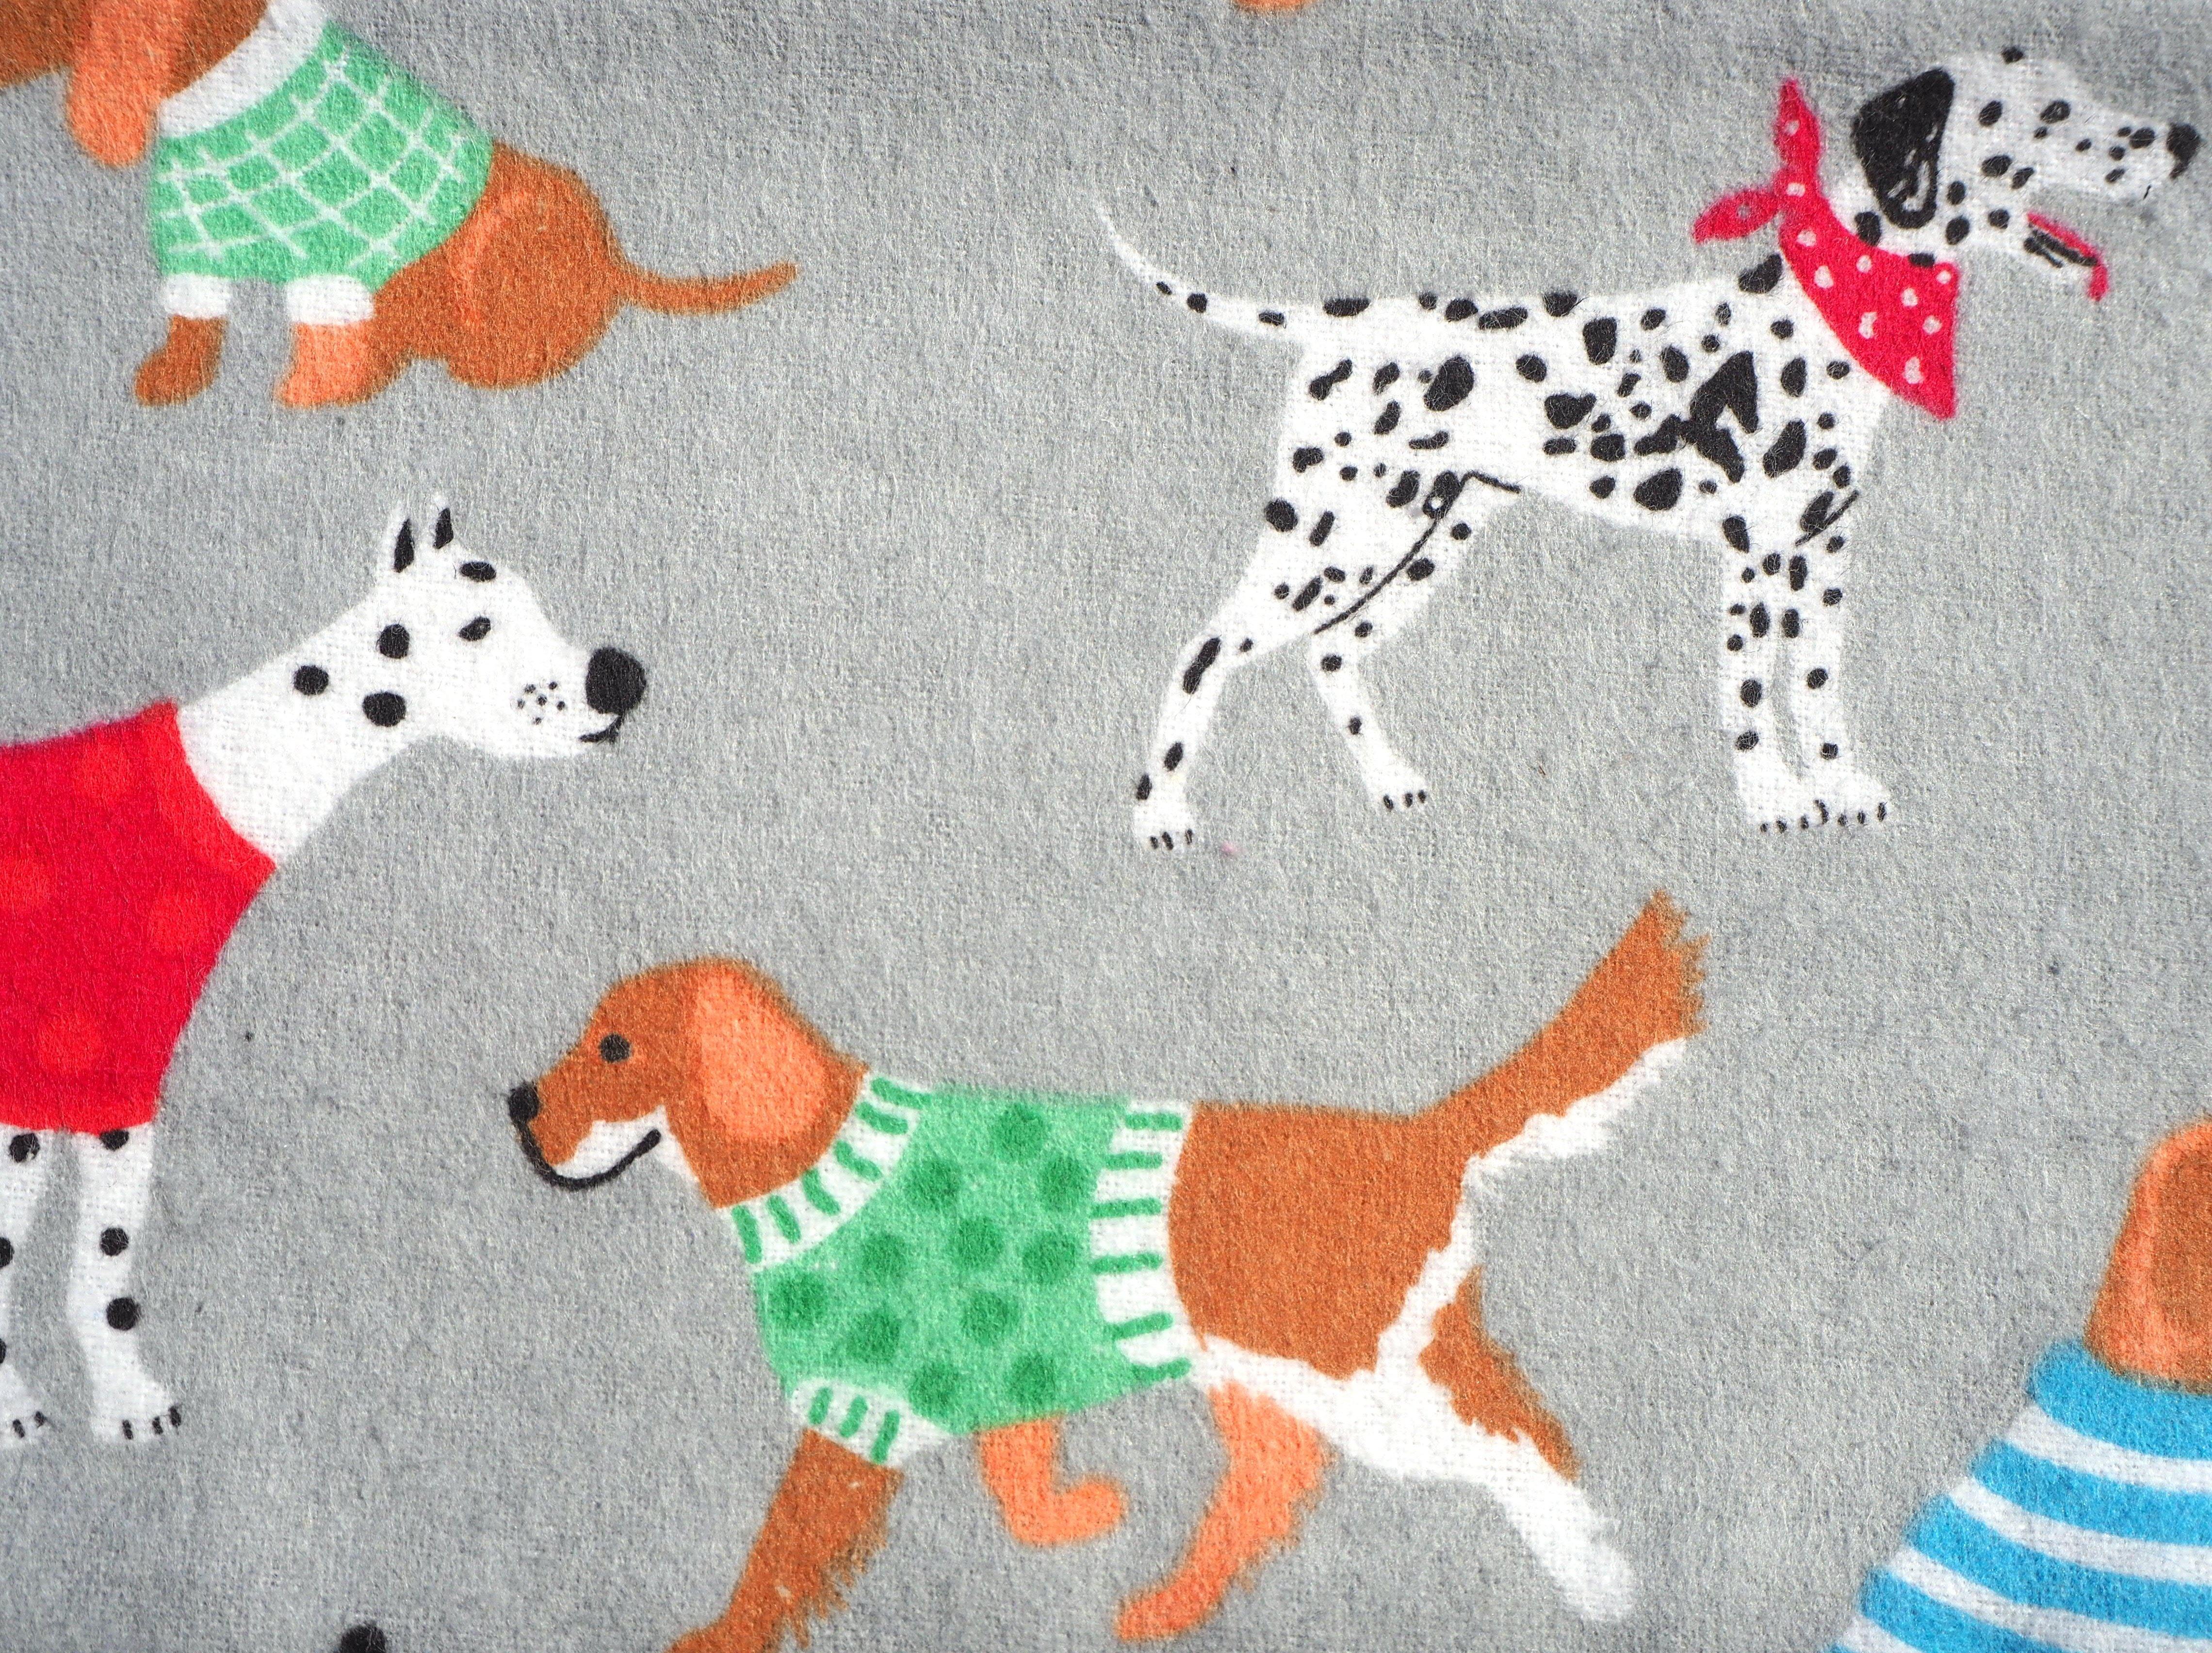 Dressed Up Hound Dogs print on soft & fluffy grey flannelette 100% cotton fabric